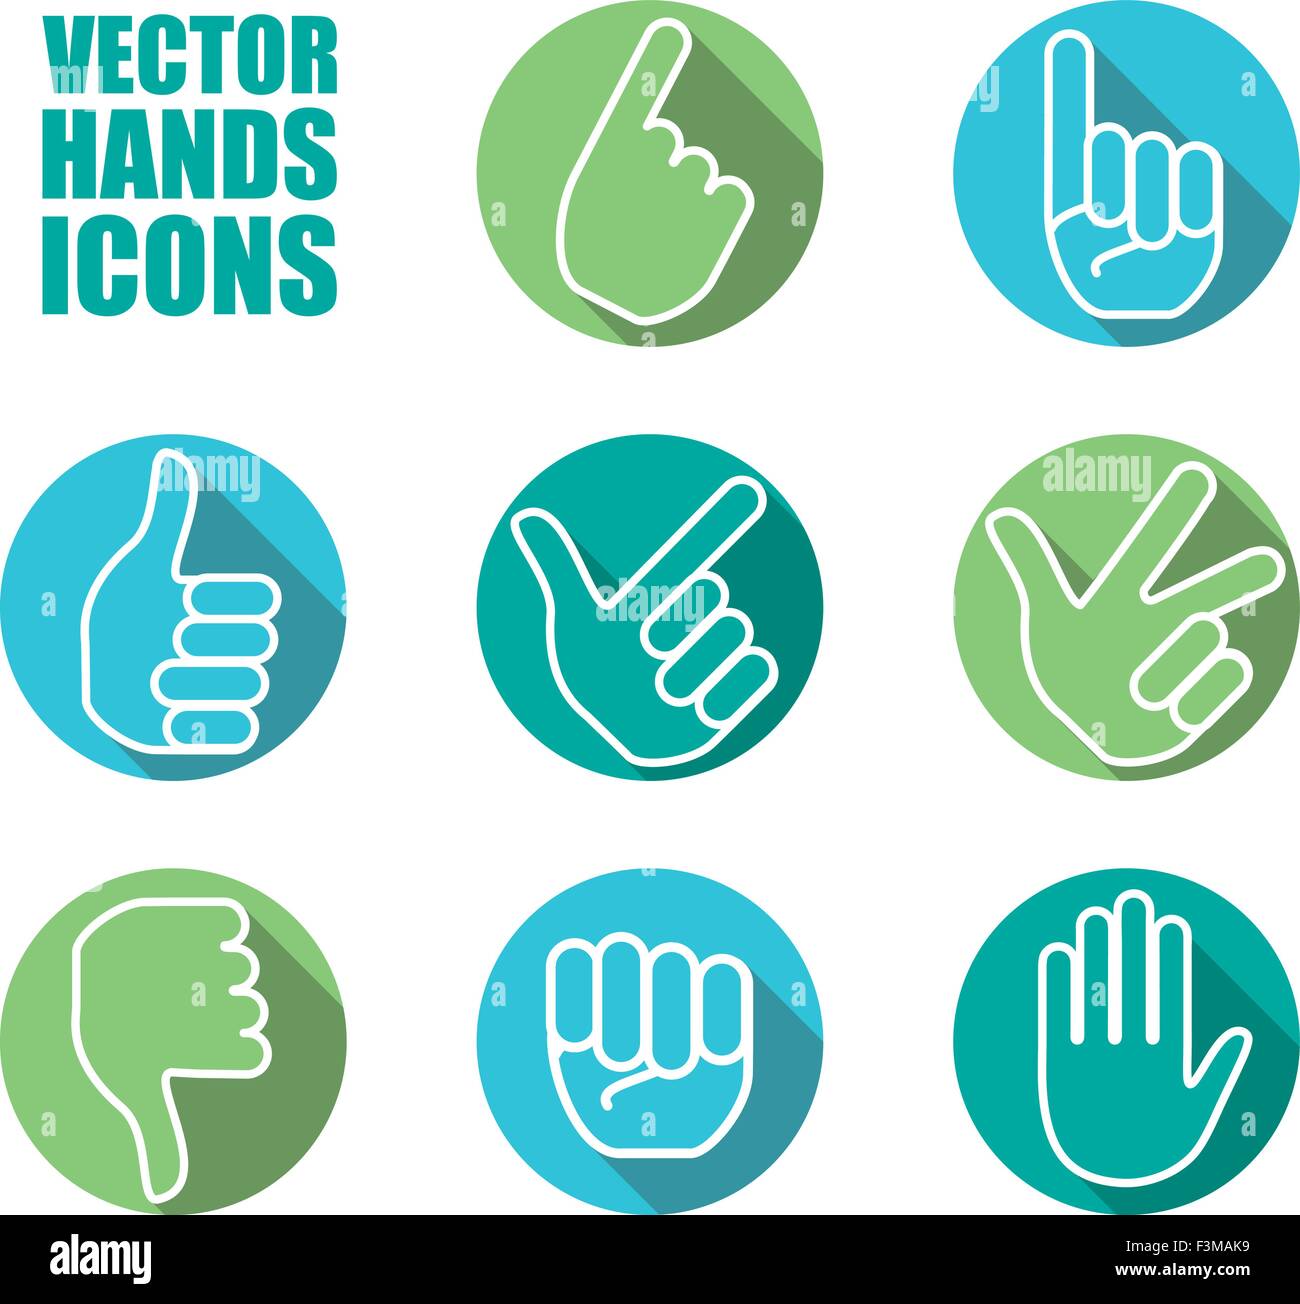 Hands icons Stock Vector